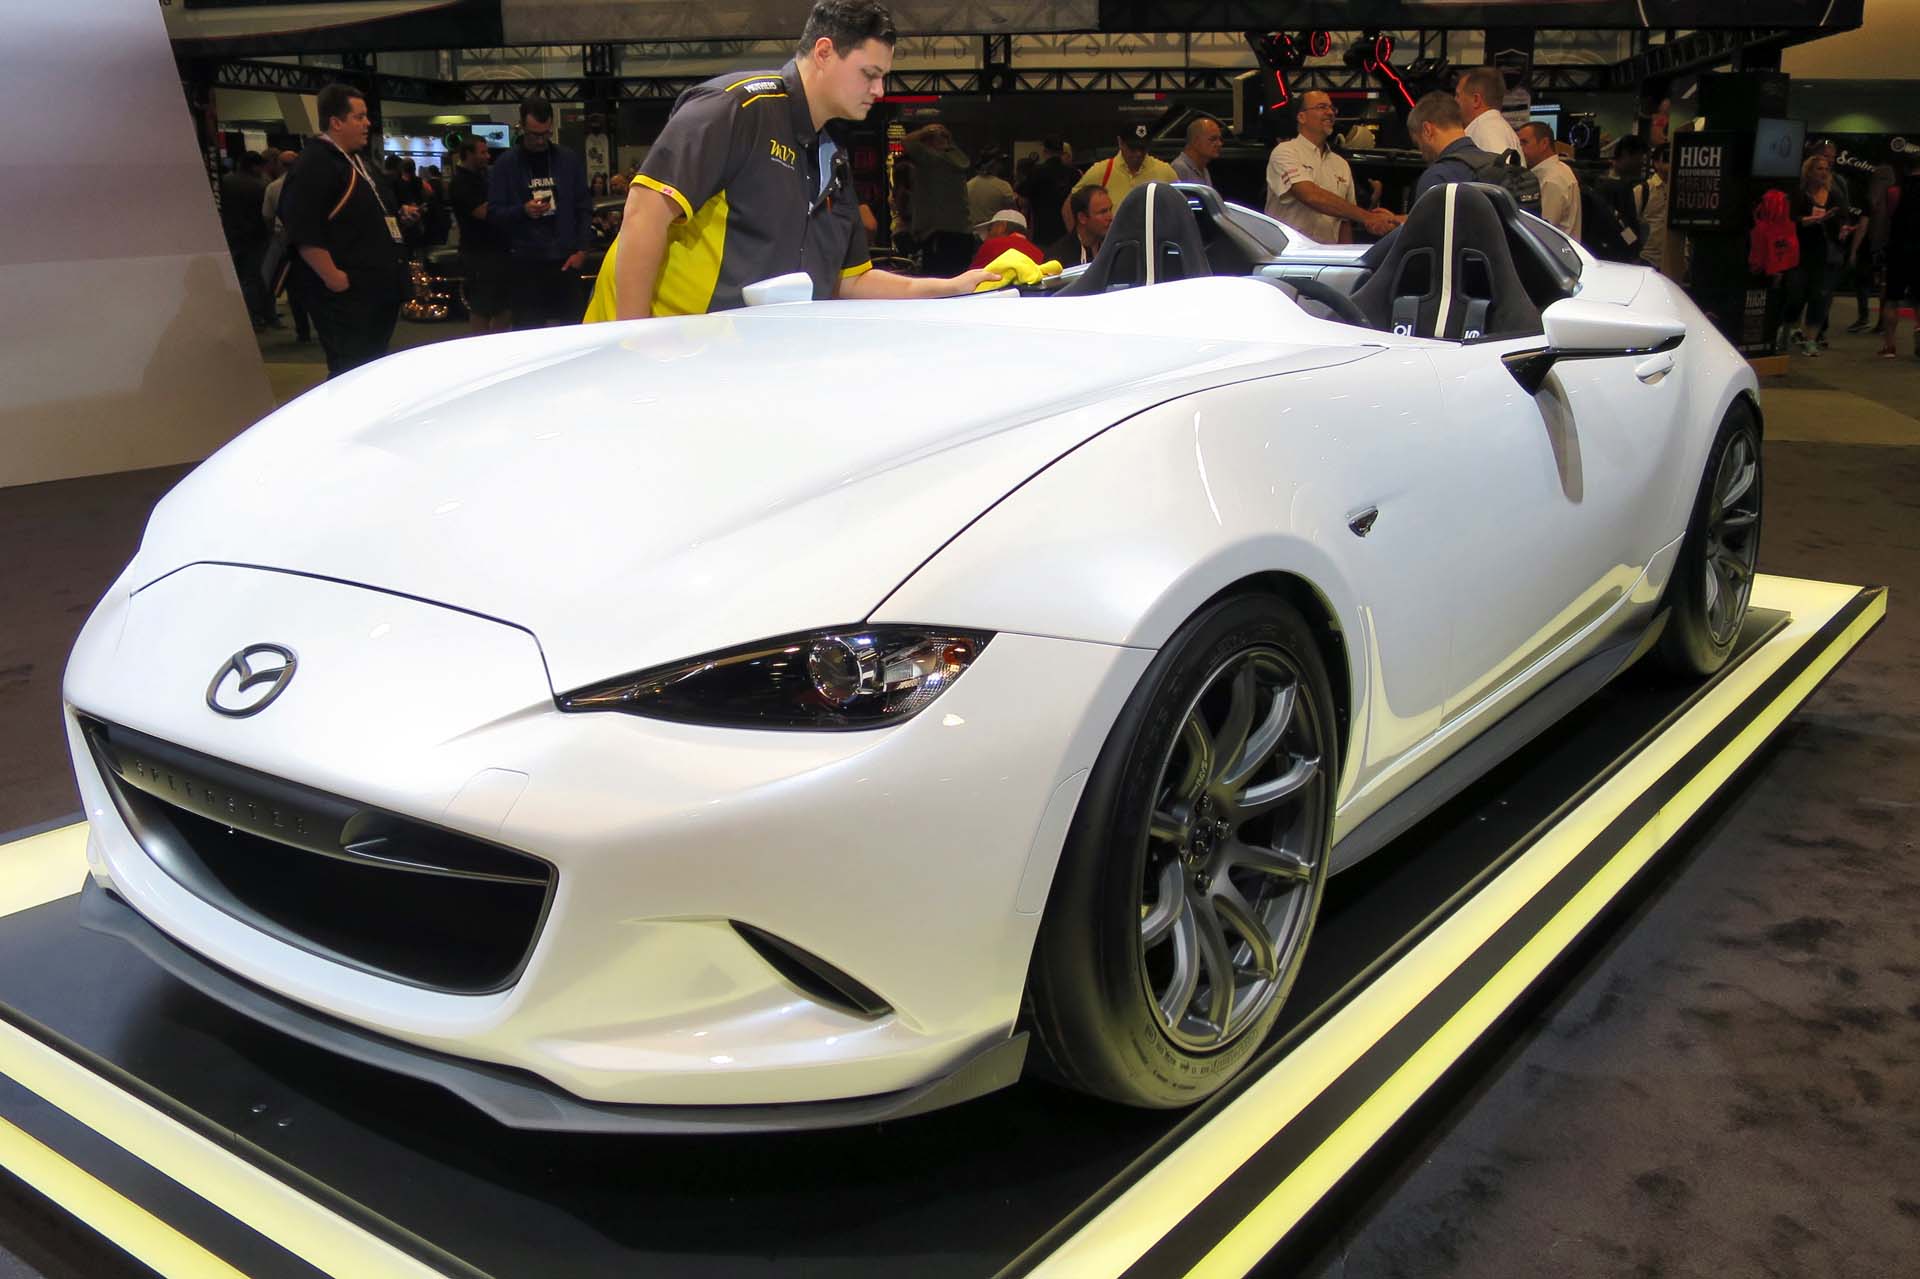 Mazda’s MX-5 Miata Speedster Evolution Concept was built by Mazda Design Americas and includes an adjustable suspension, 17-inch lightweight wheels, and a carbon fibre aero kit.